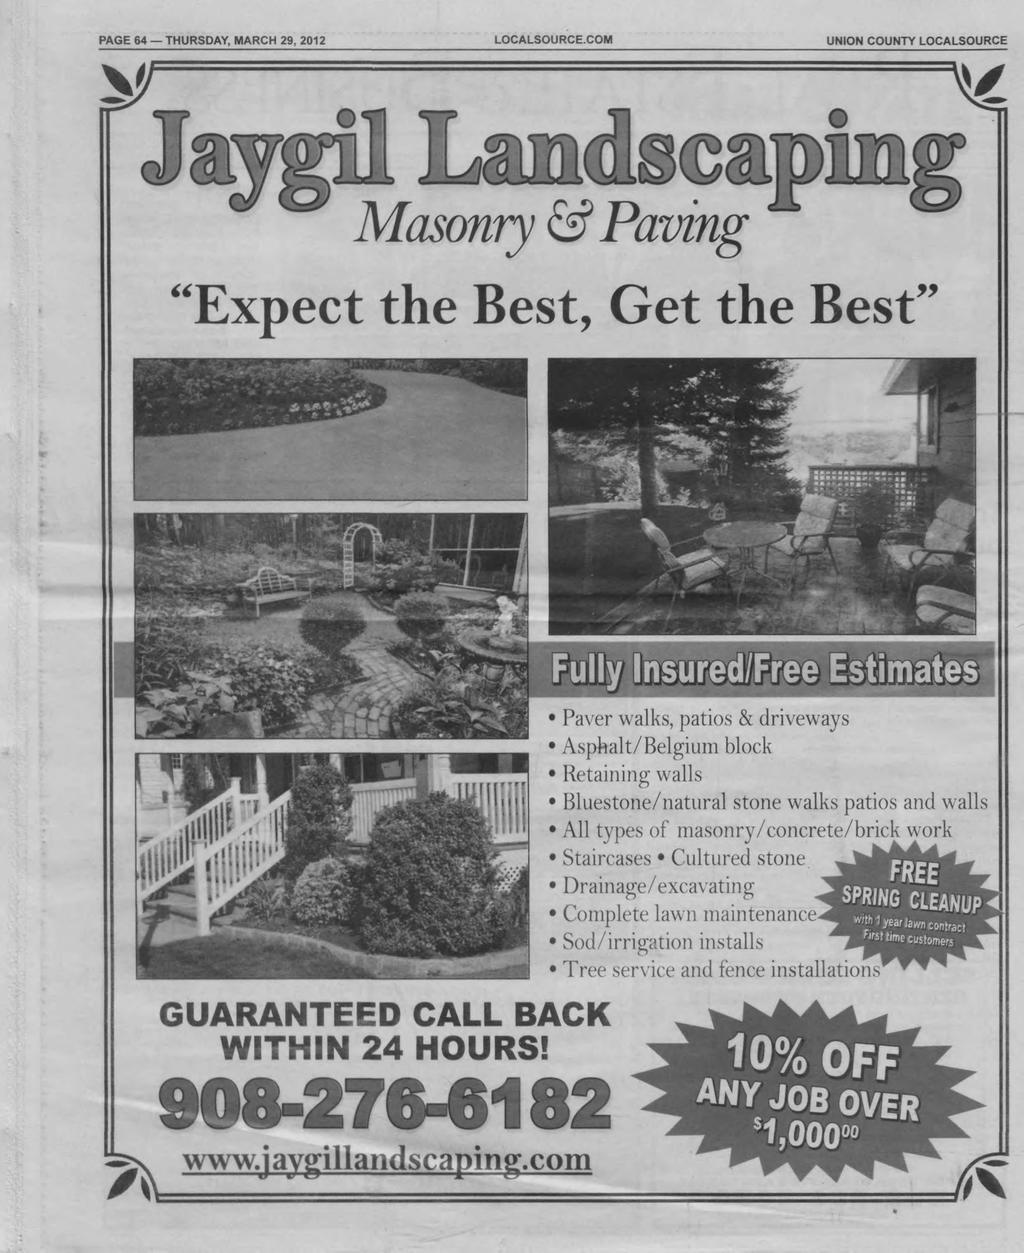 PAGE 64 THURSDAY, MARCH 29, 2012 LOCALSOURCE.COM COUNTY LOCALSOURCE Masonry & Paving Expect the Best, Get the Best!^v GUARANTEED CALL BACK WITHIN 24 HOURS! 908-276-6182 www.jaygillandscaping.